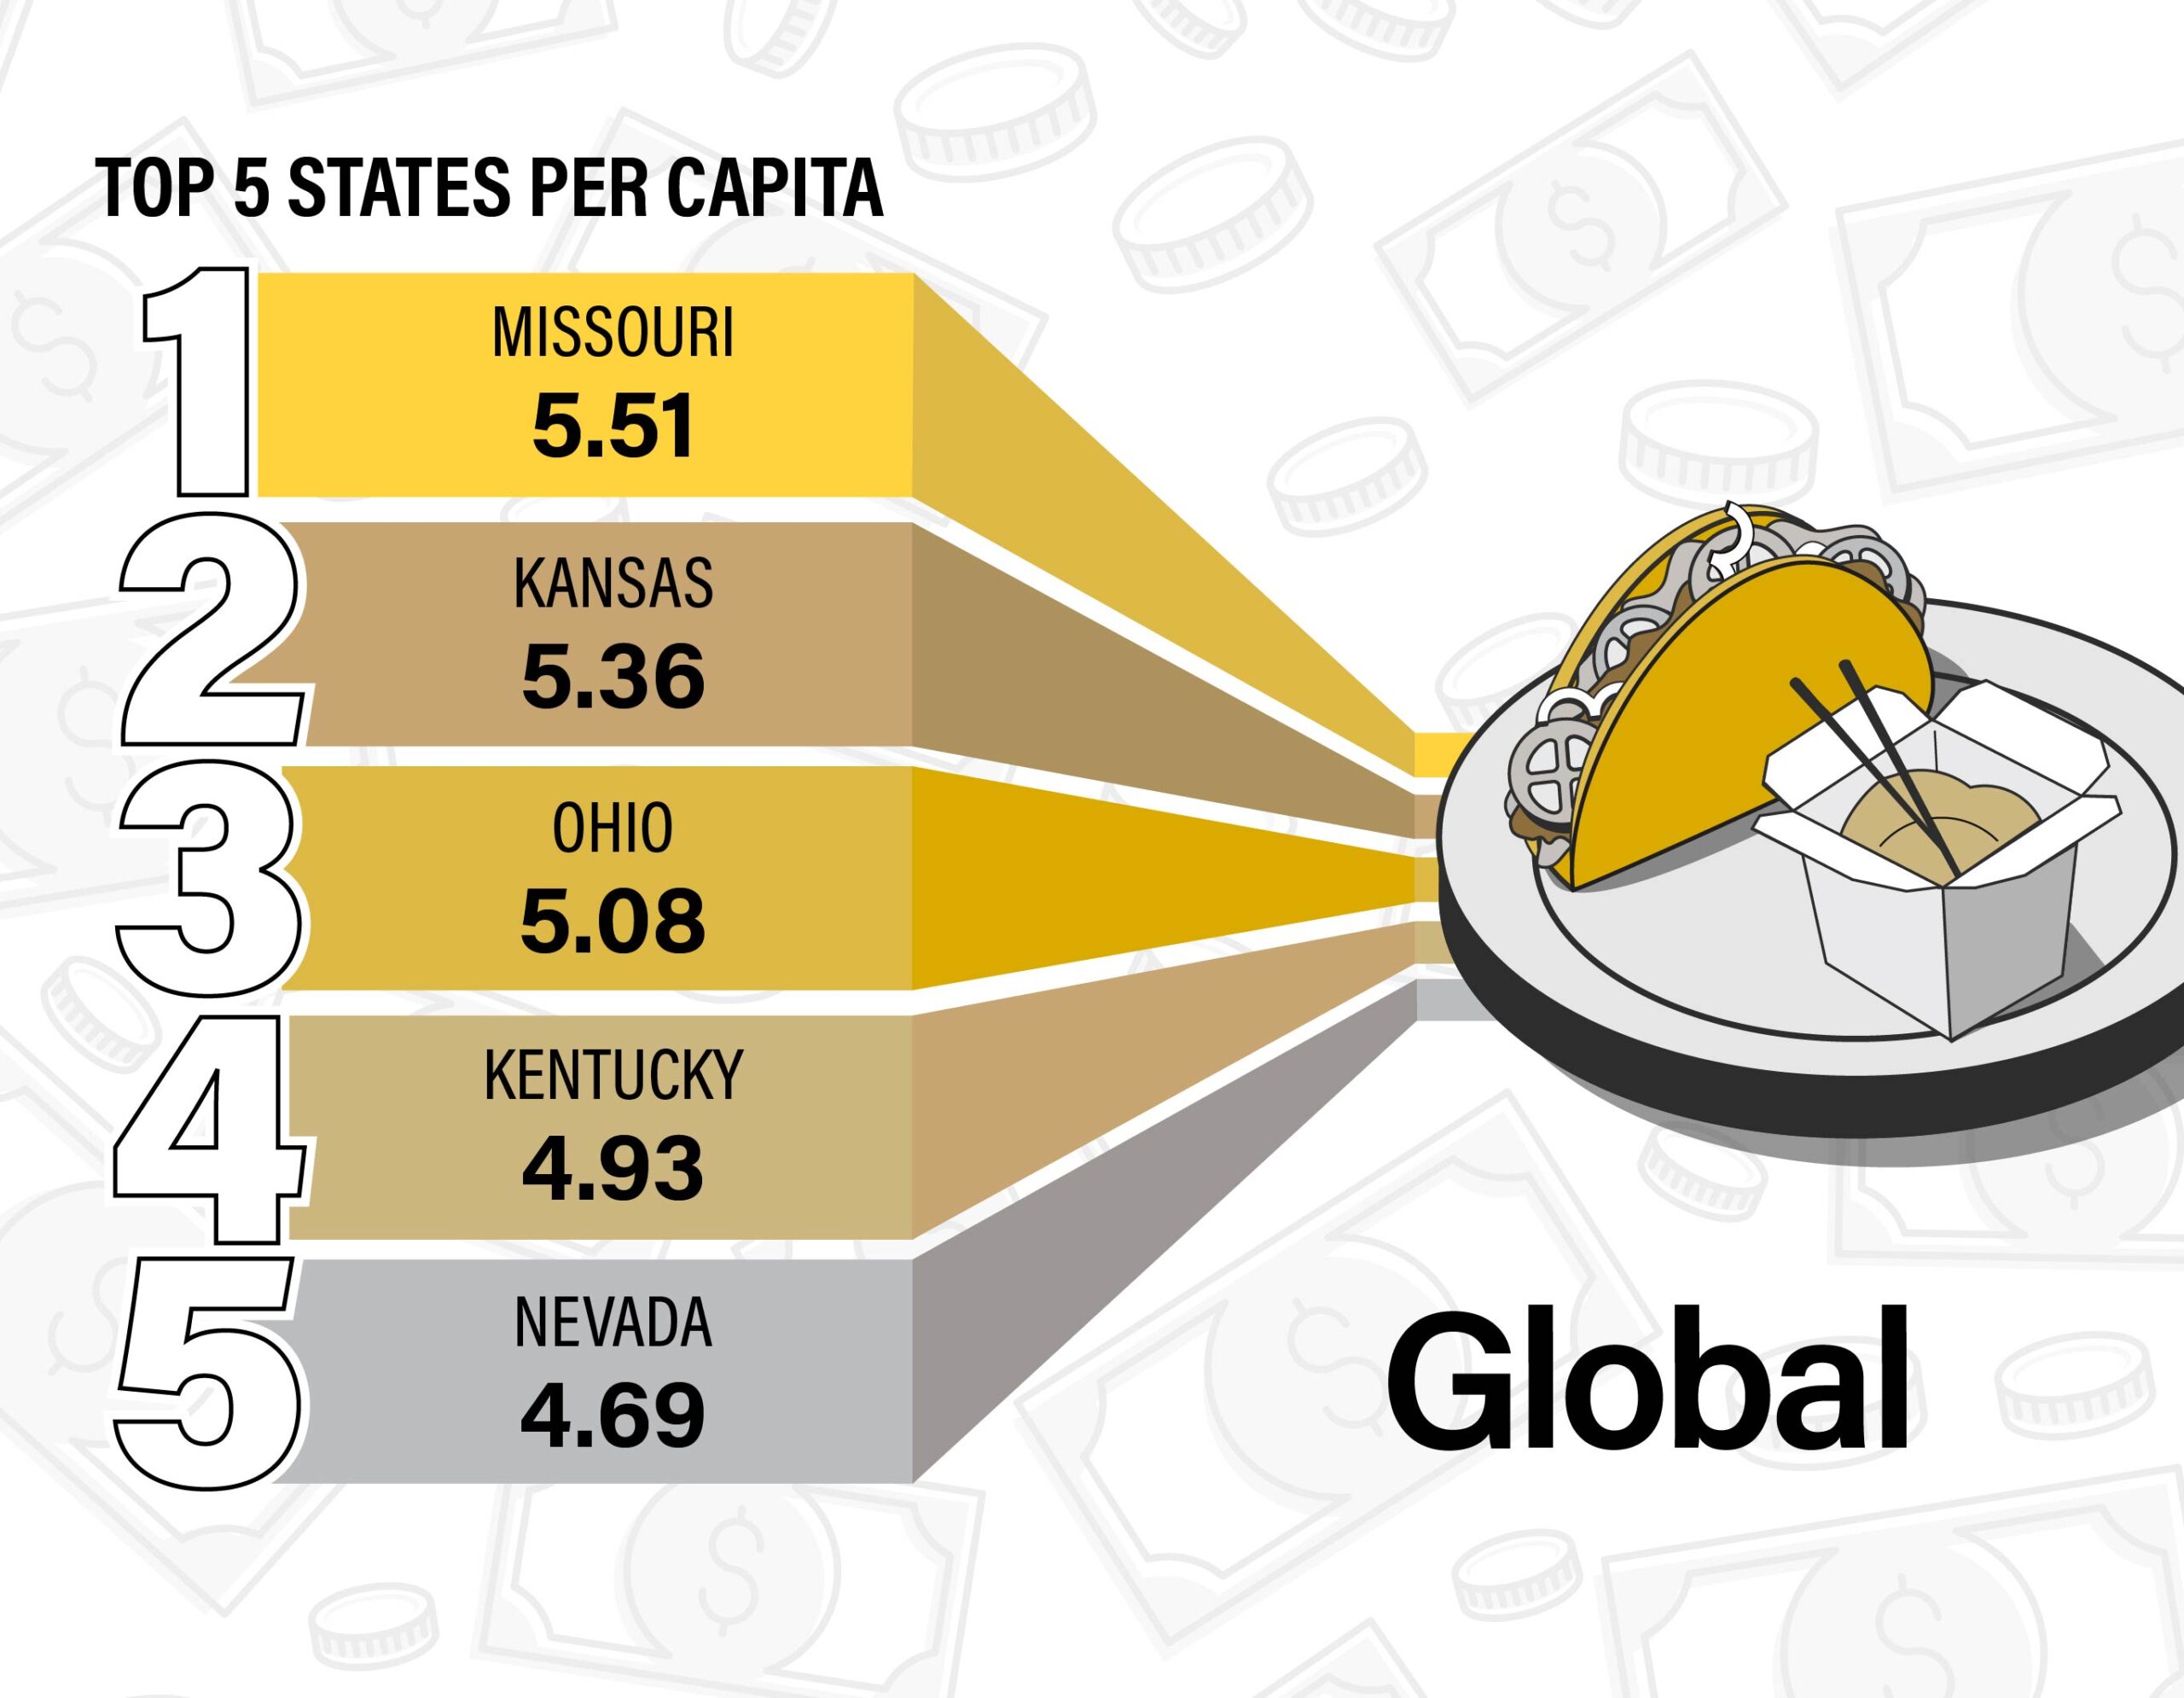 Figure 7. Food for thought: Americans enjoy restaurants like Chipotle, Panda Express and Taco Bell, which are all under the global umbrella. Data shows that the states with higher index scores for international menu items are in the Great Plains and the Midwest.